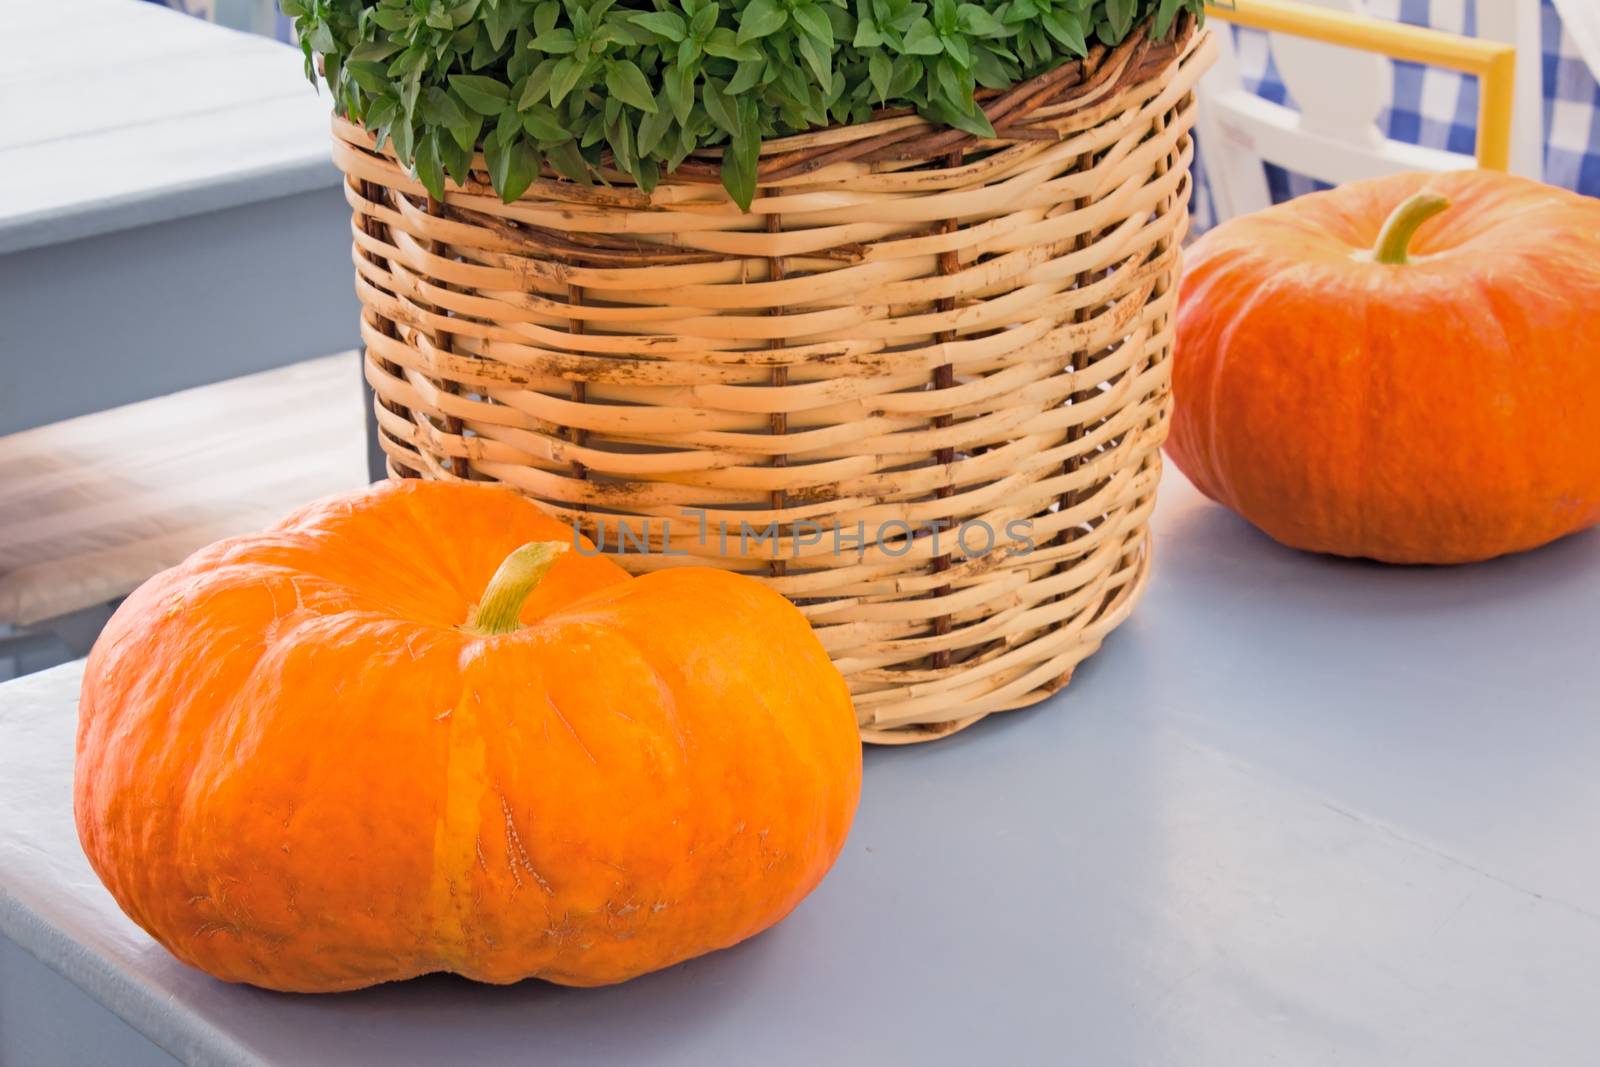 On a table two big orange pumpkins and a wattled basket with green plants are located.